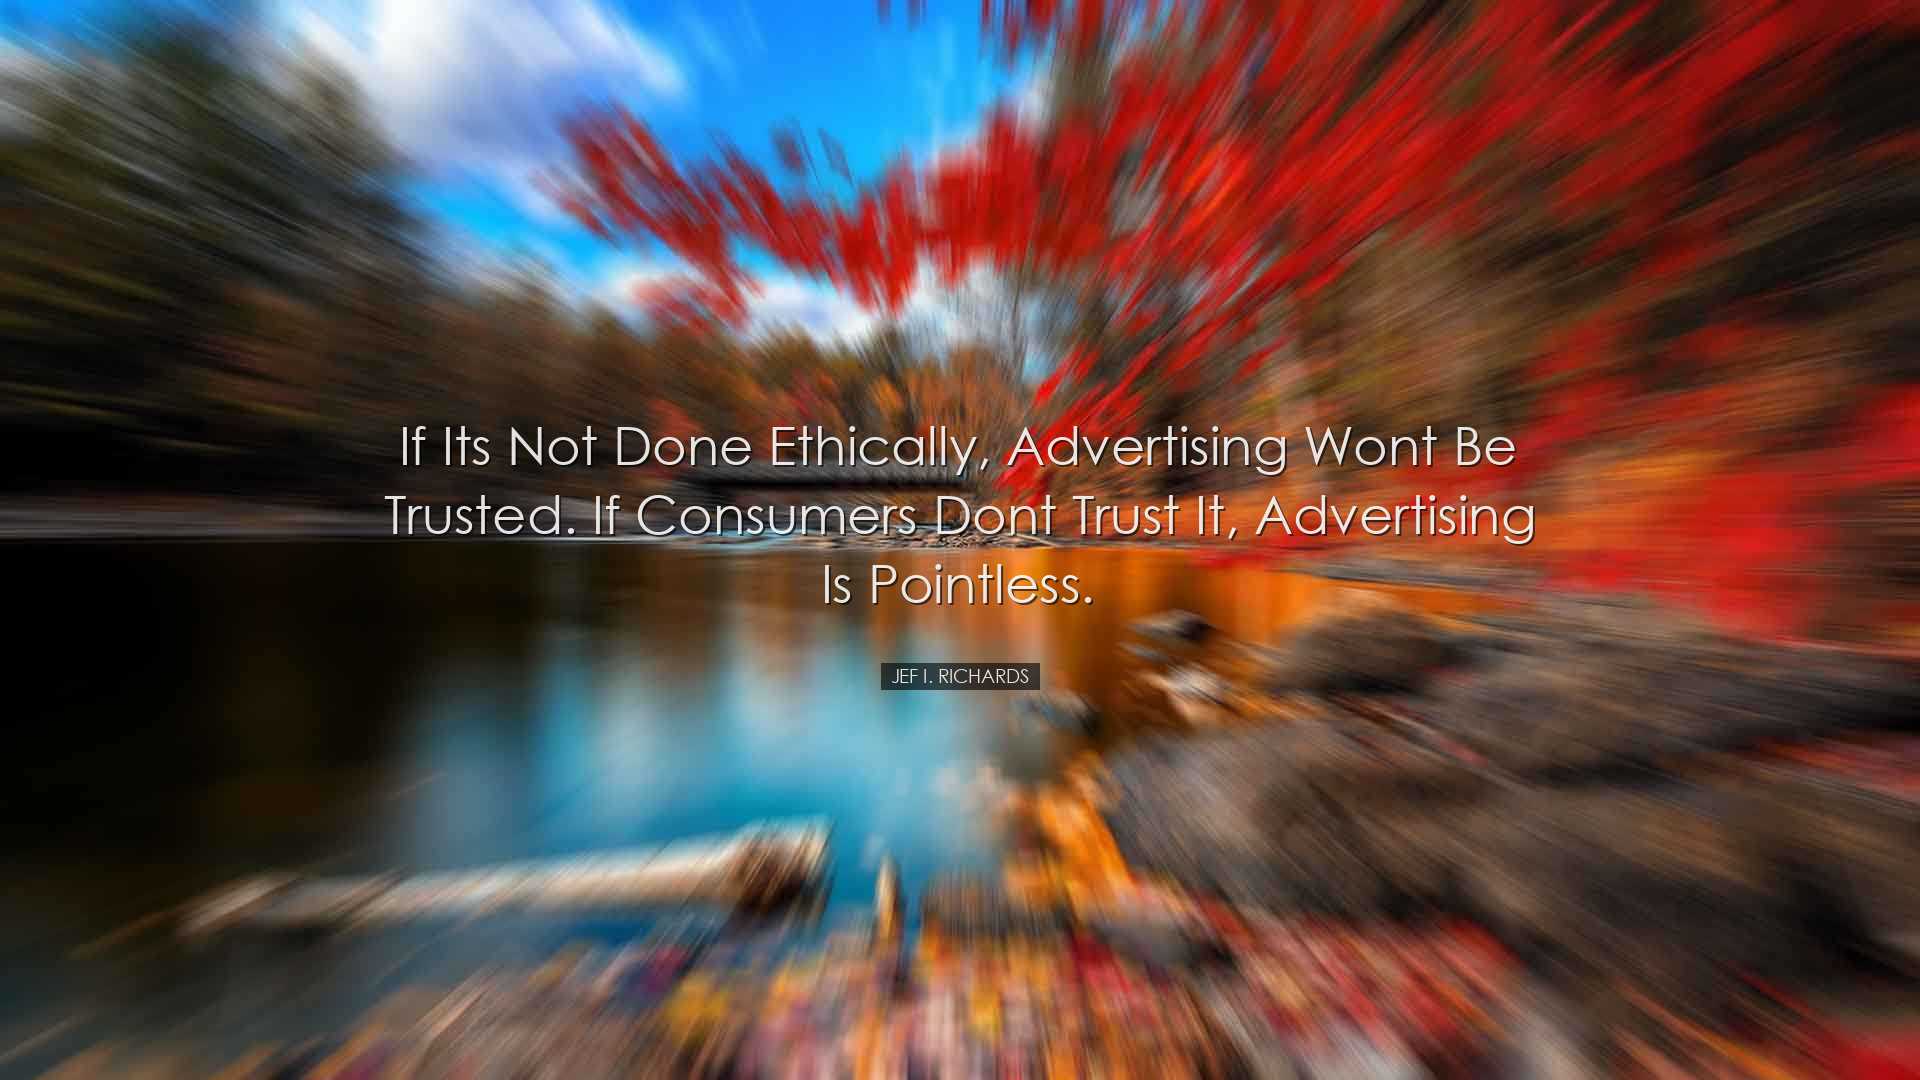 If its not done ethically, advertising wont be trusted. If consume